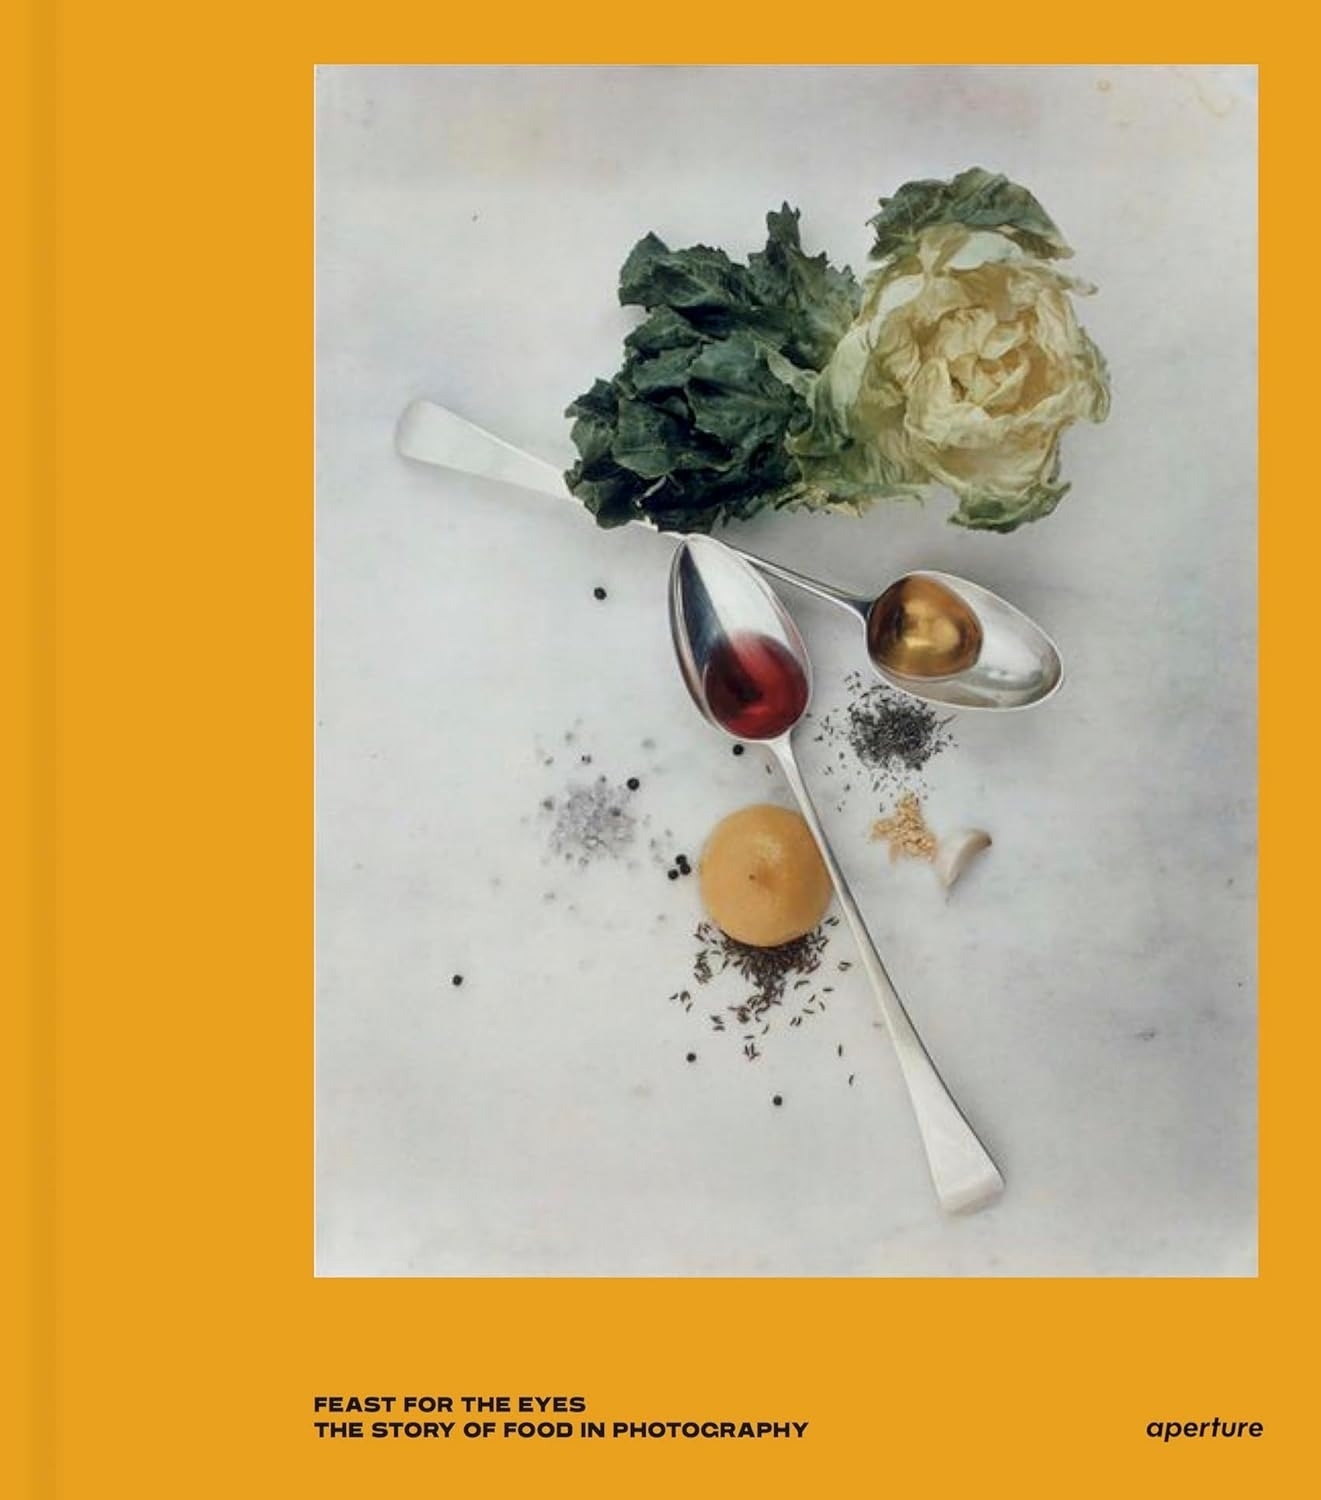 the yellow book with a photo of food on the cover